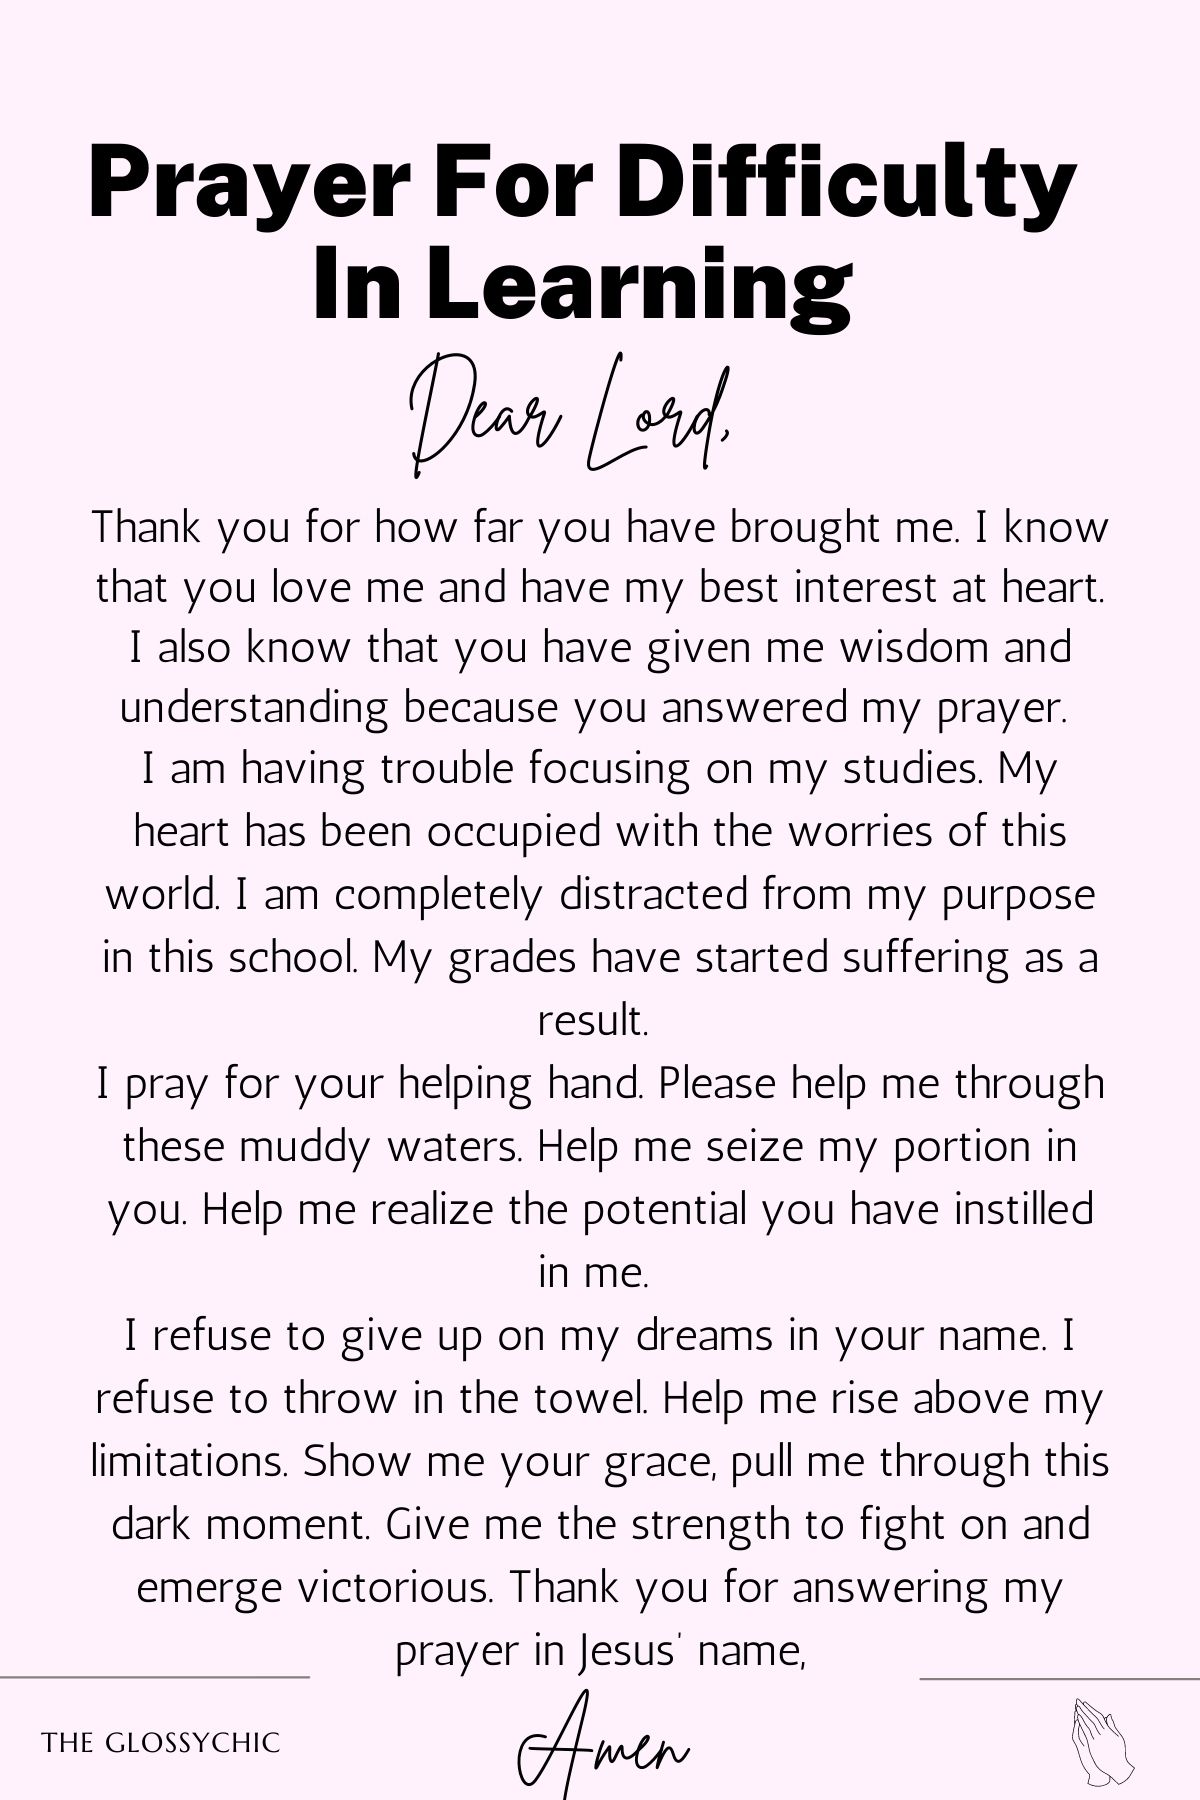 Prayer for difficulty in learning